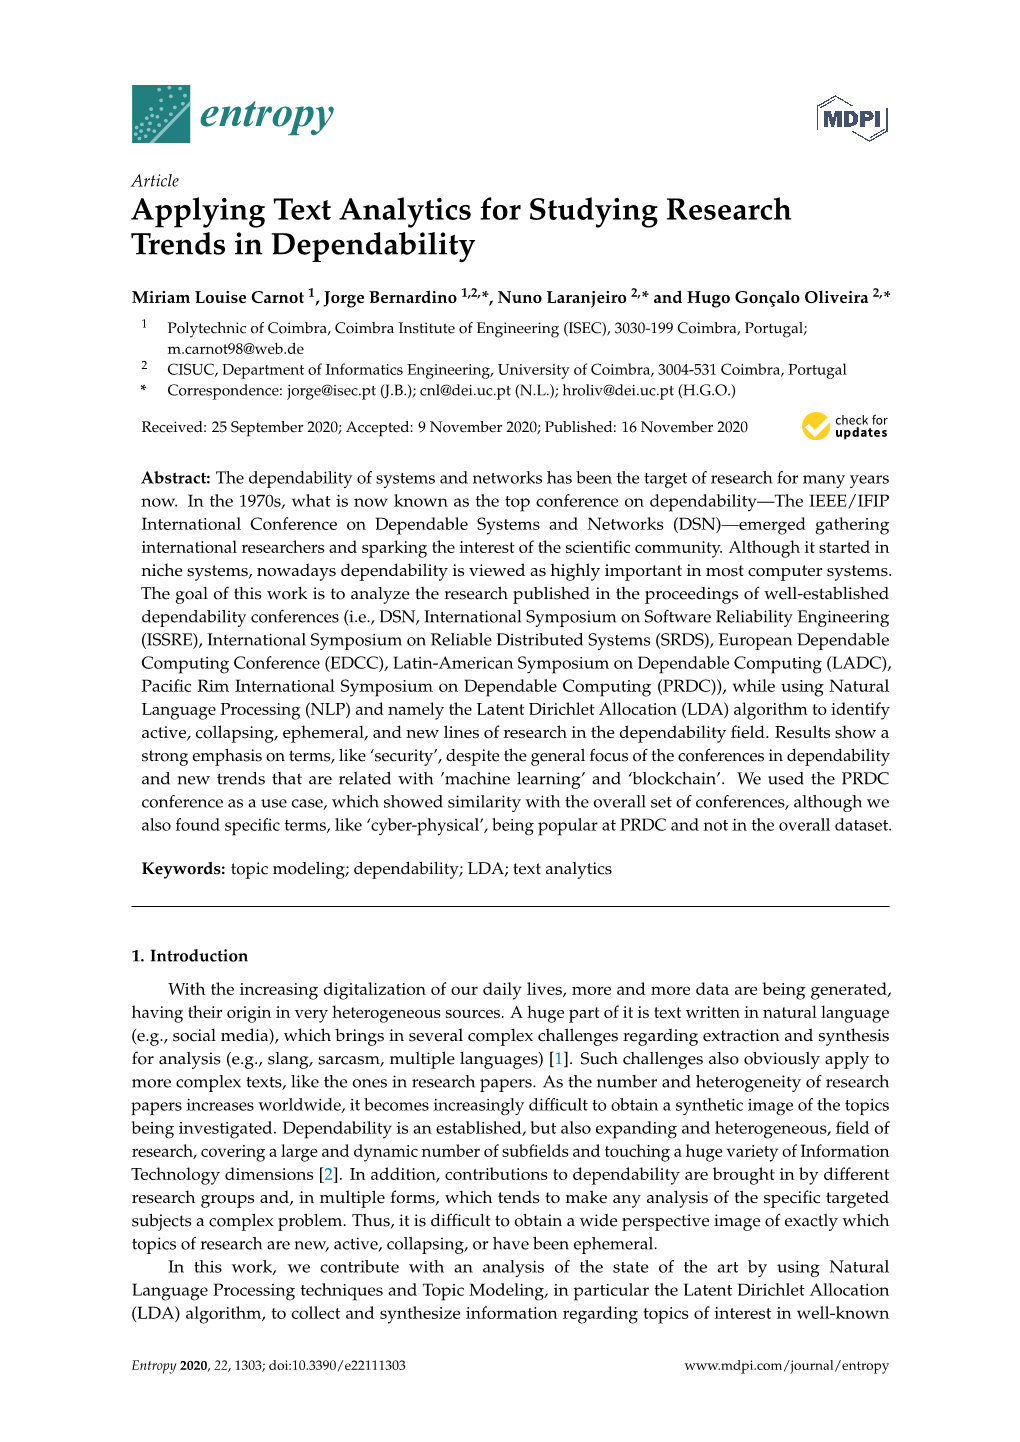 Applying Text Analytics for Studying Research Trends in Dependability